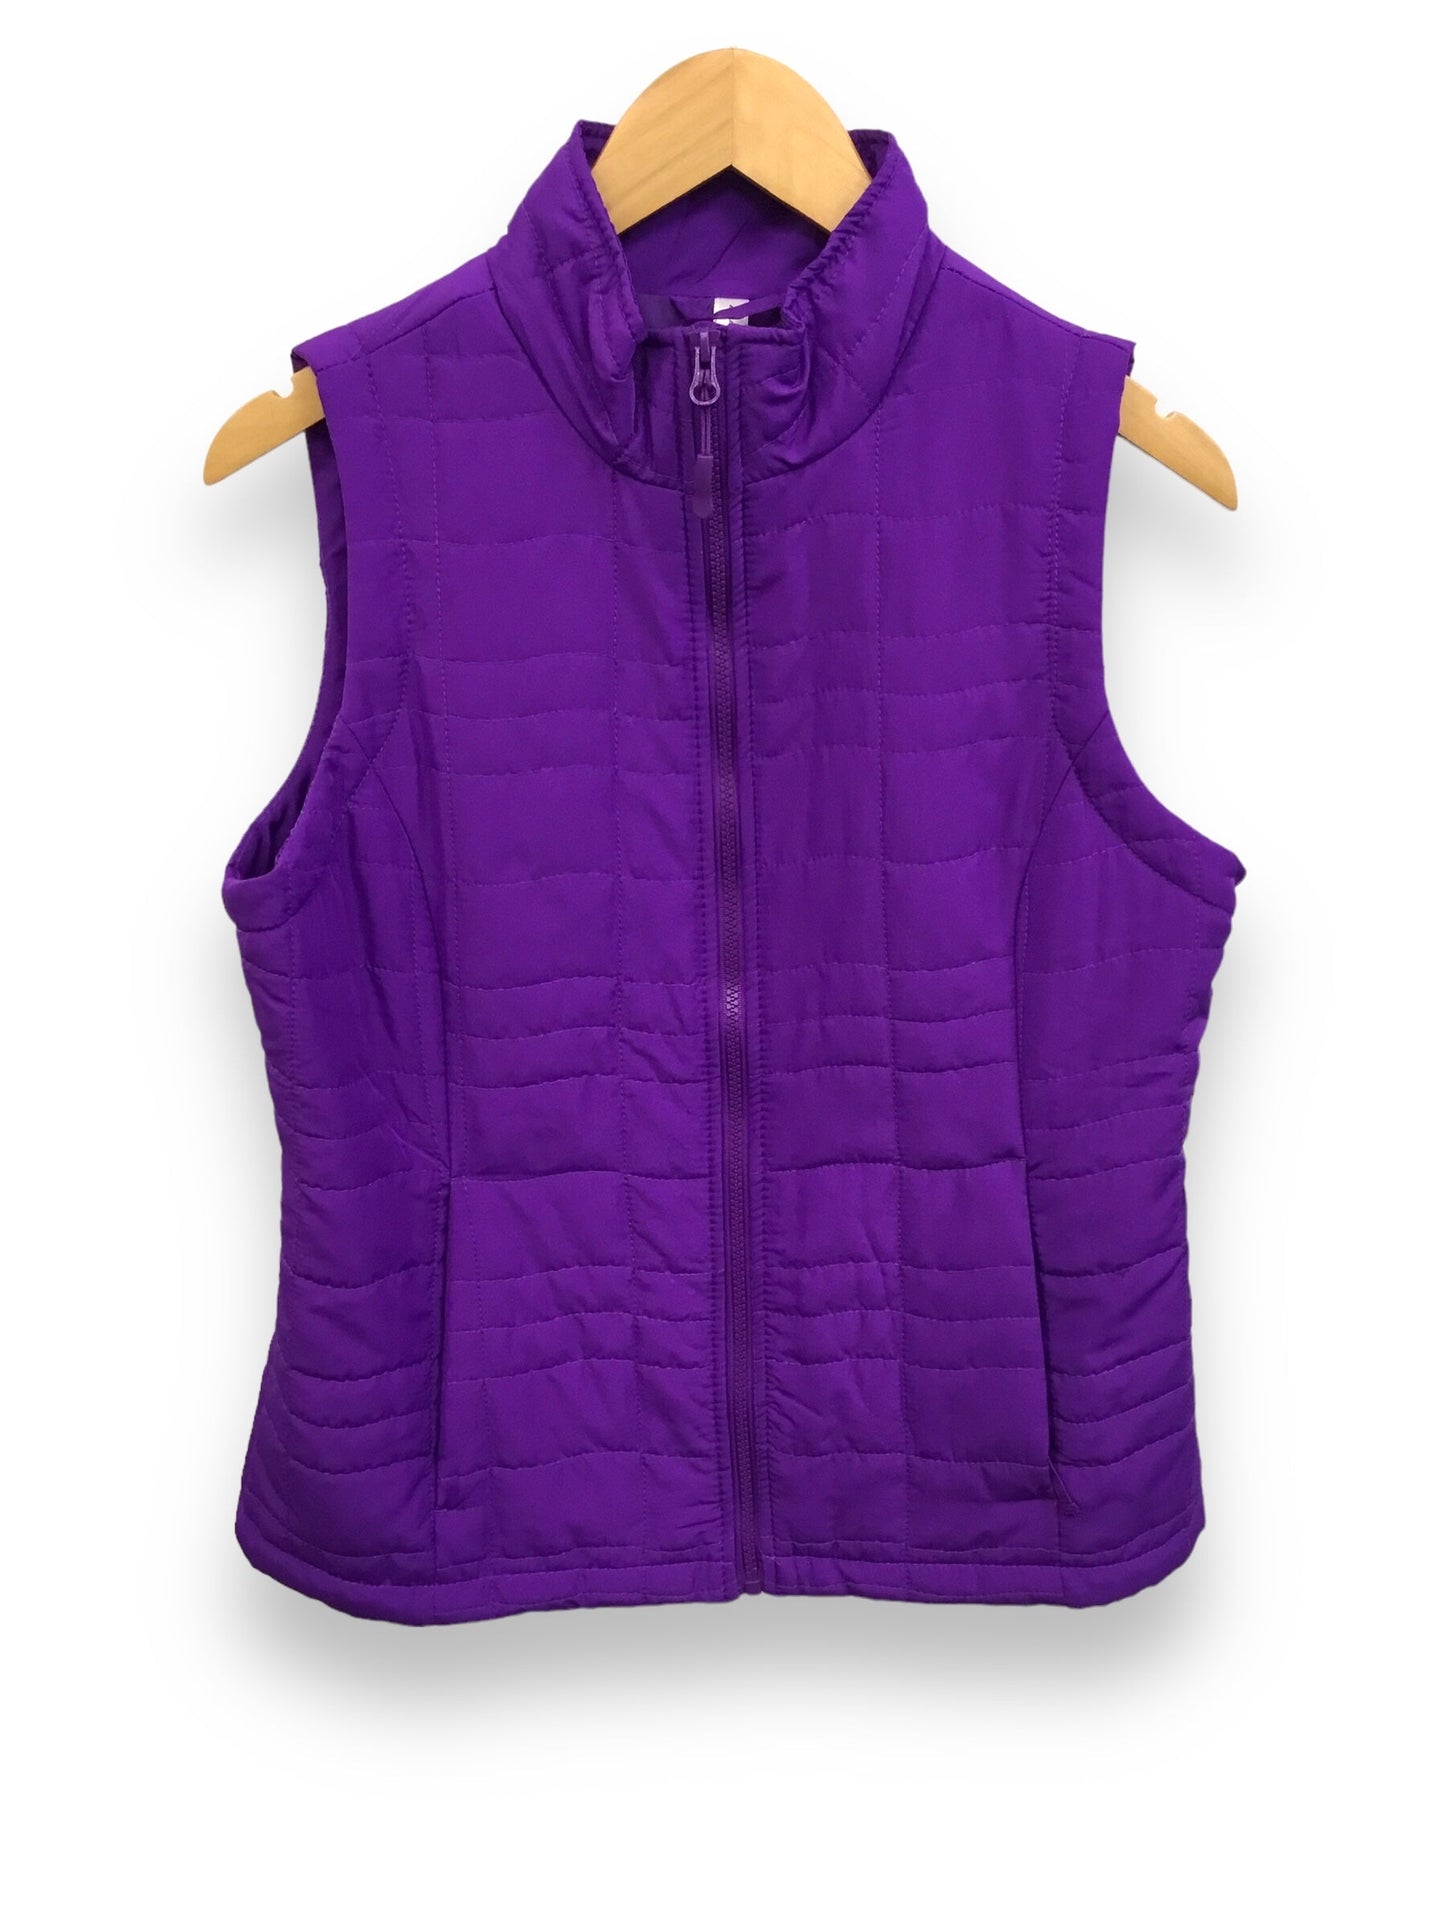 NWT Purple Vest Puffer & Quilted Clothes Mentor, Size M